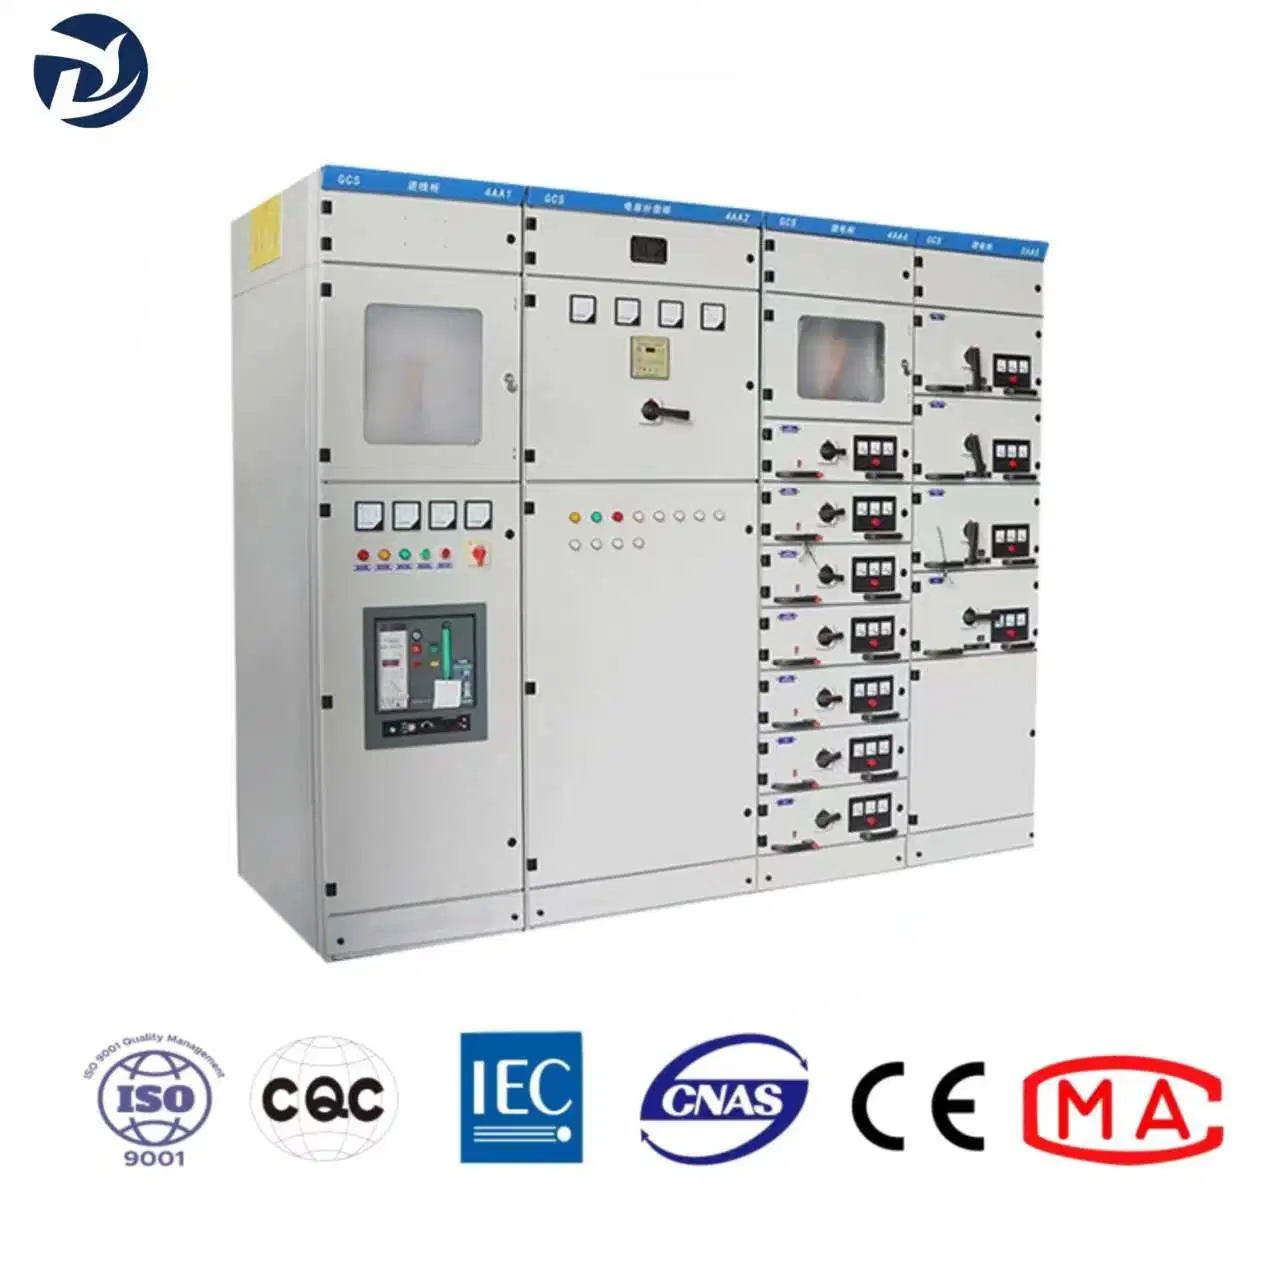 Low Voltage Switchgear Gcs Series Electrical Equipment Supplies. 33kv Switchgear Price. Electrical Switch